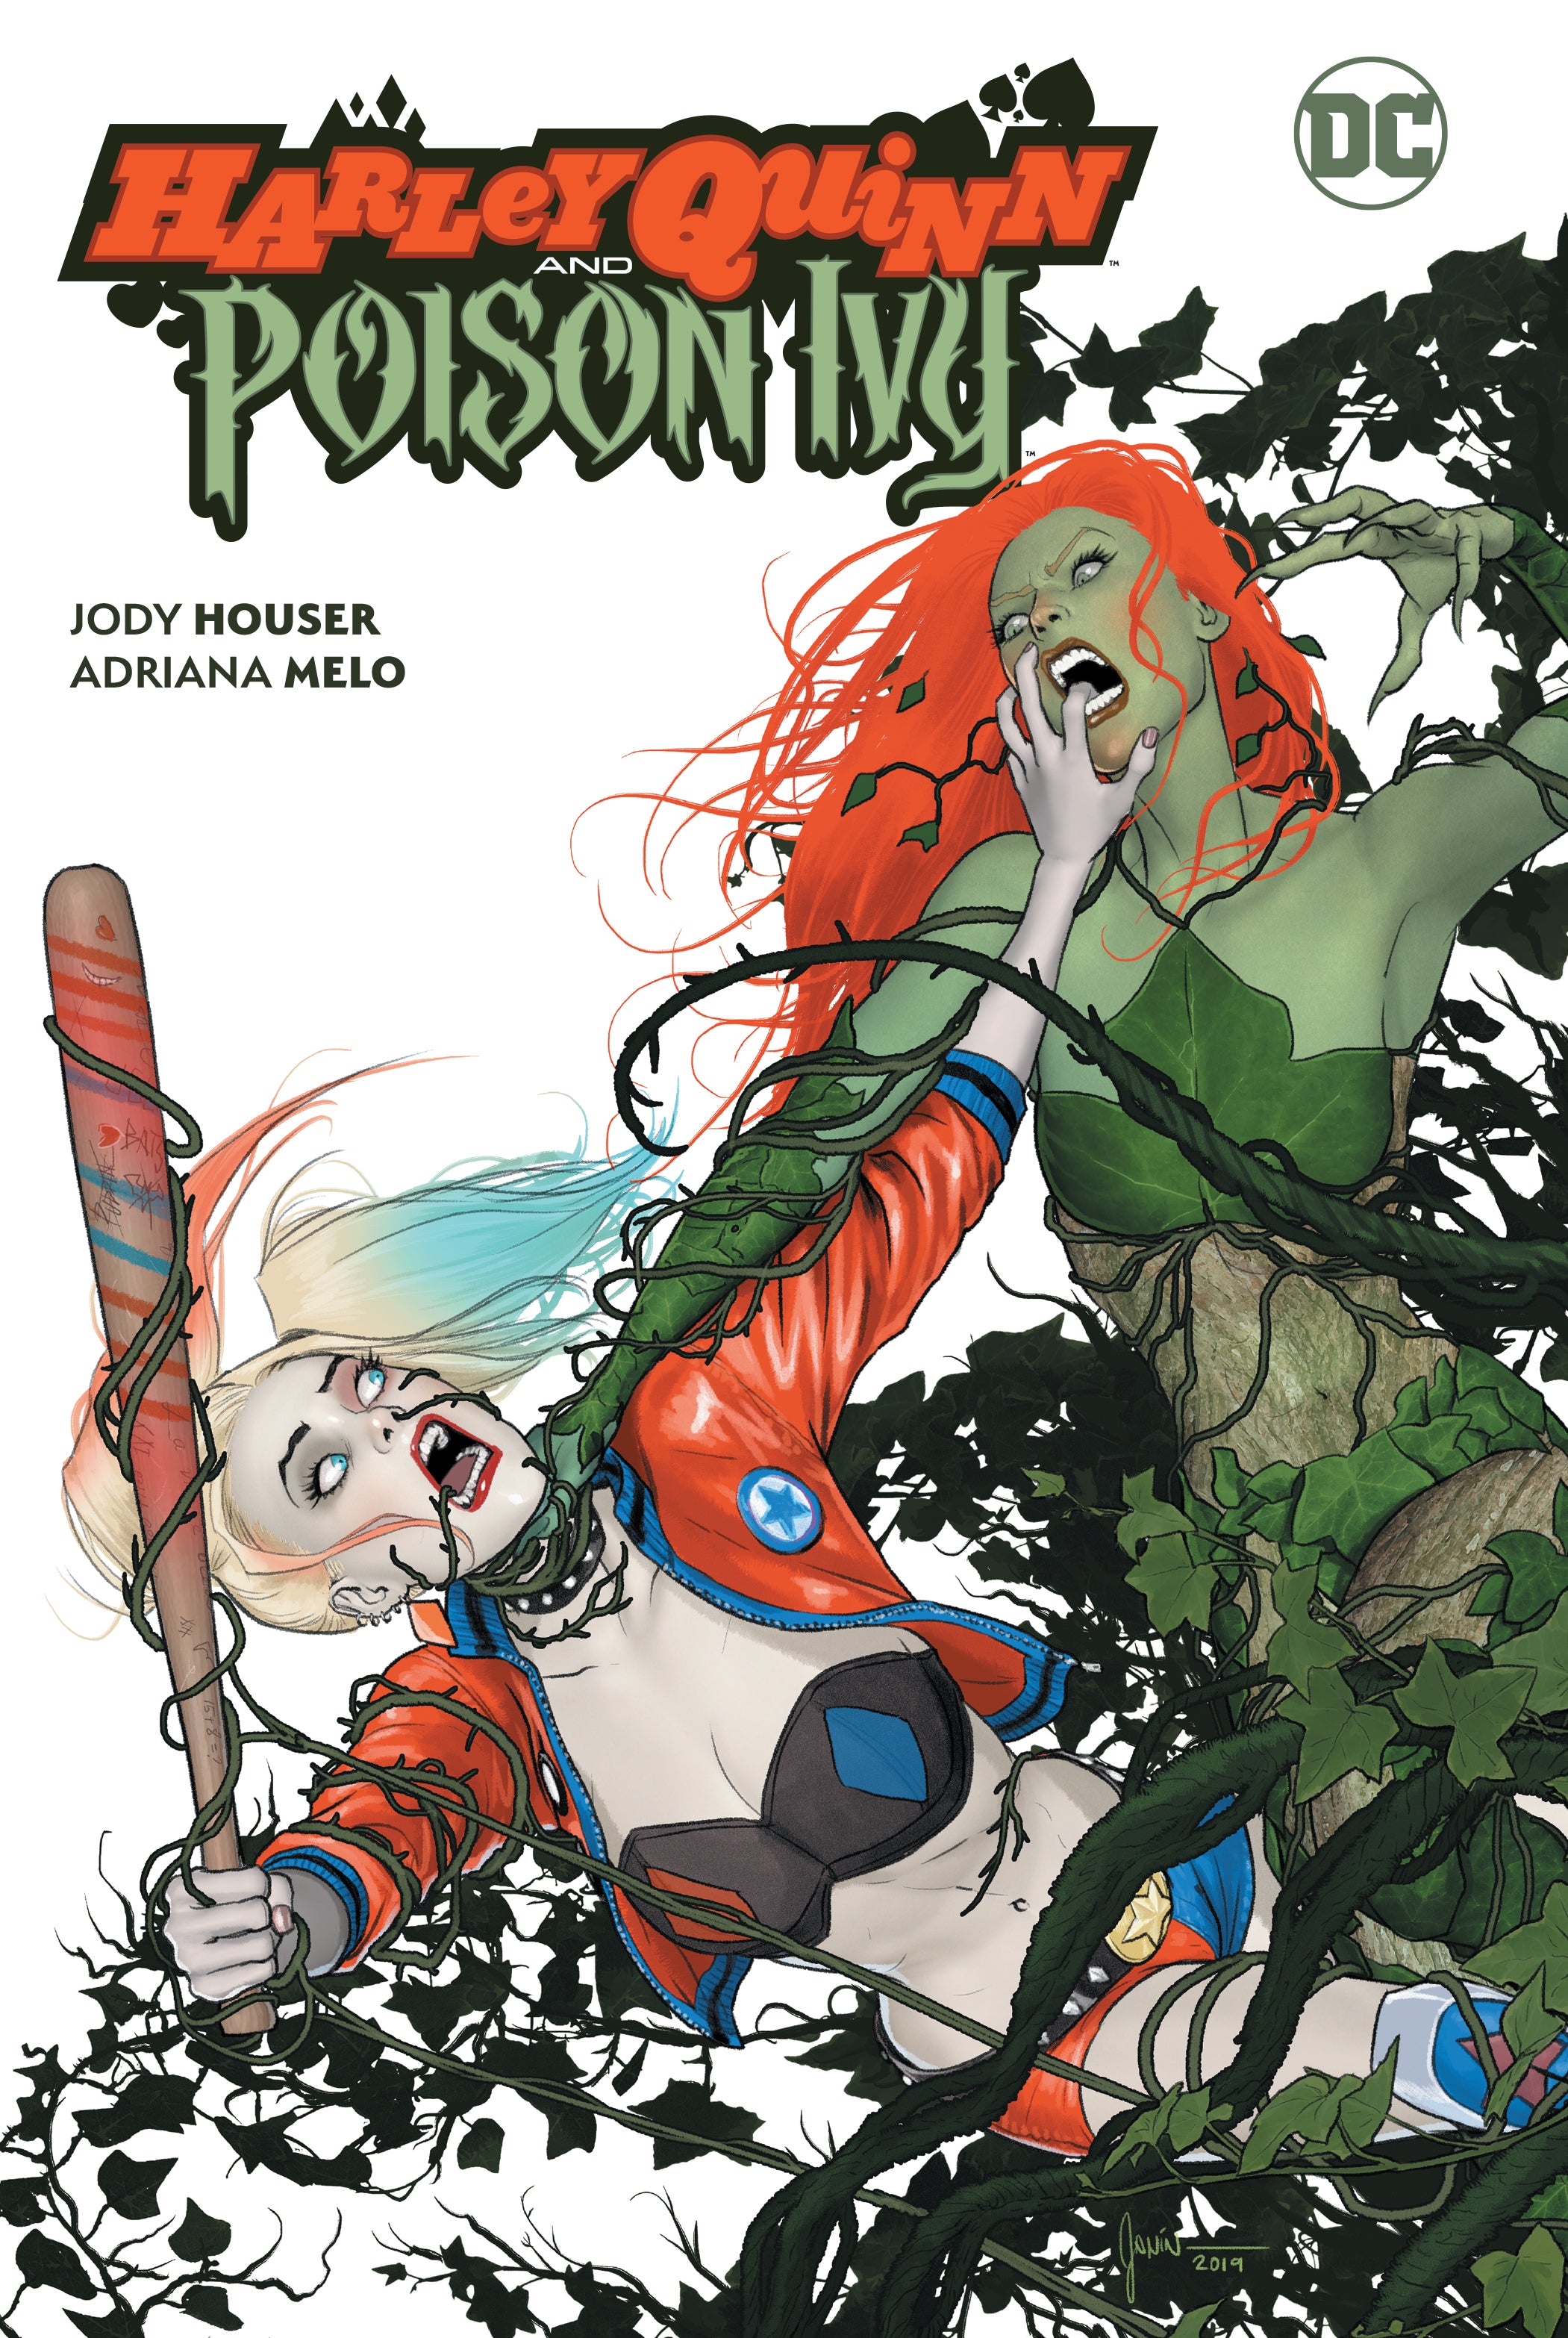 HARLEY QUINN AND POISON IVY TRADE PAPERBACK